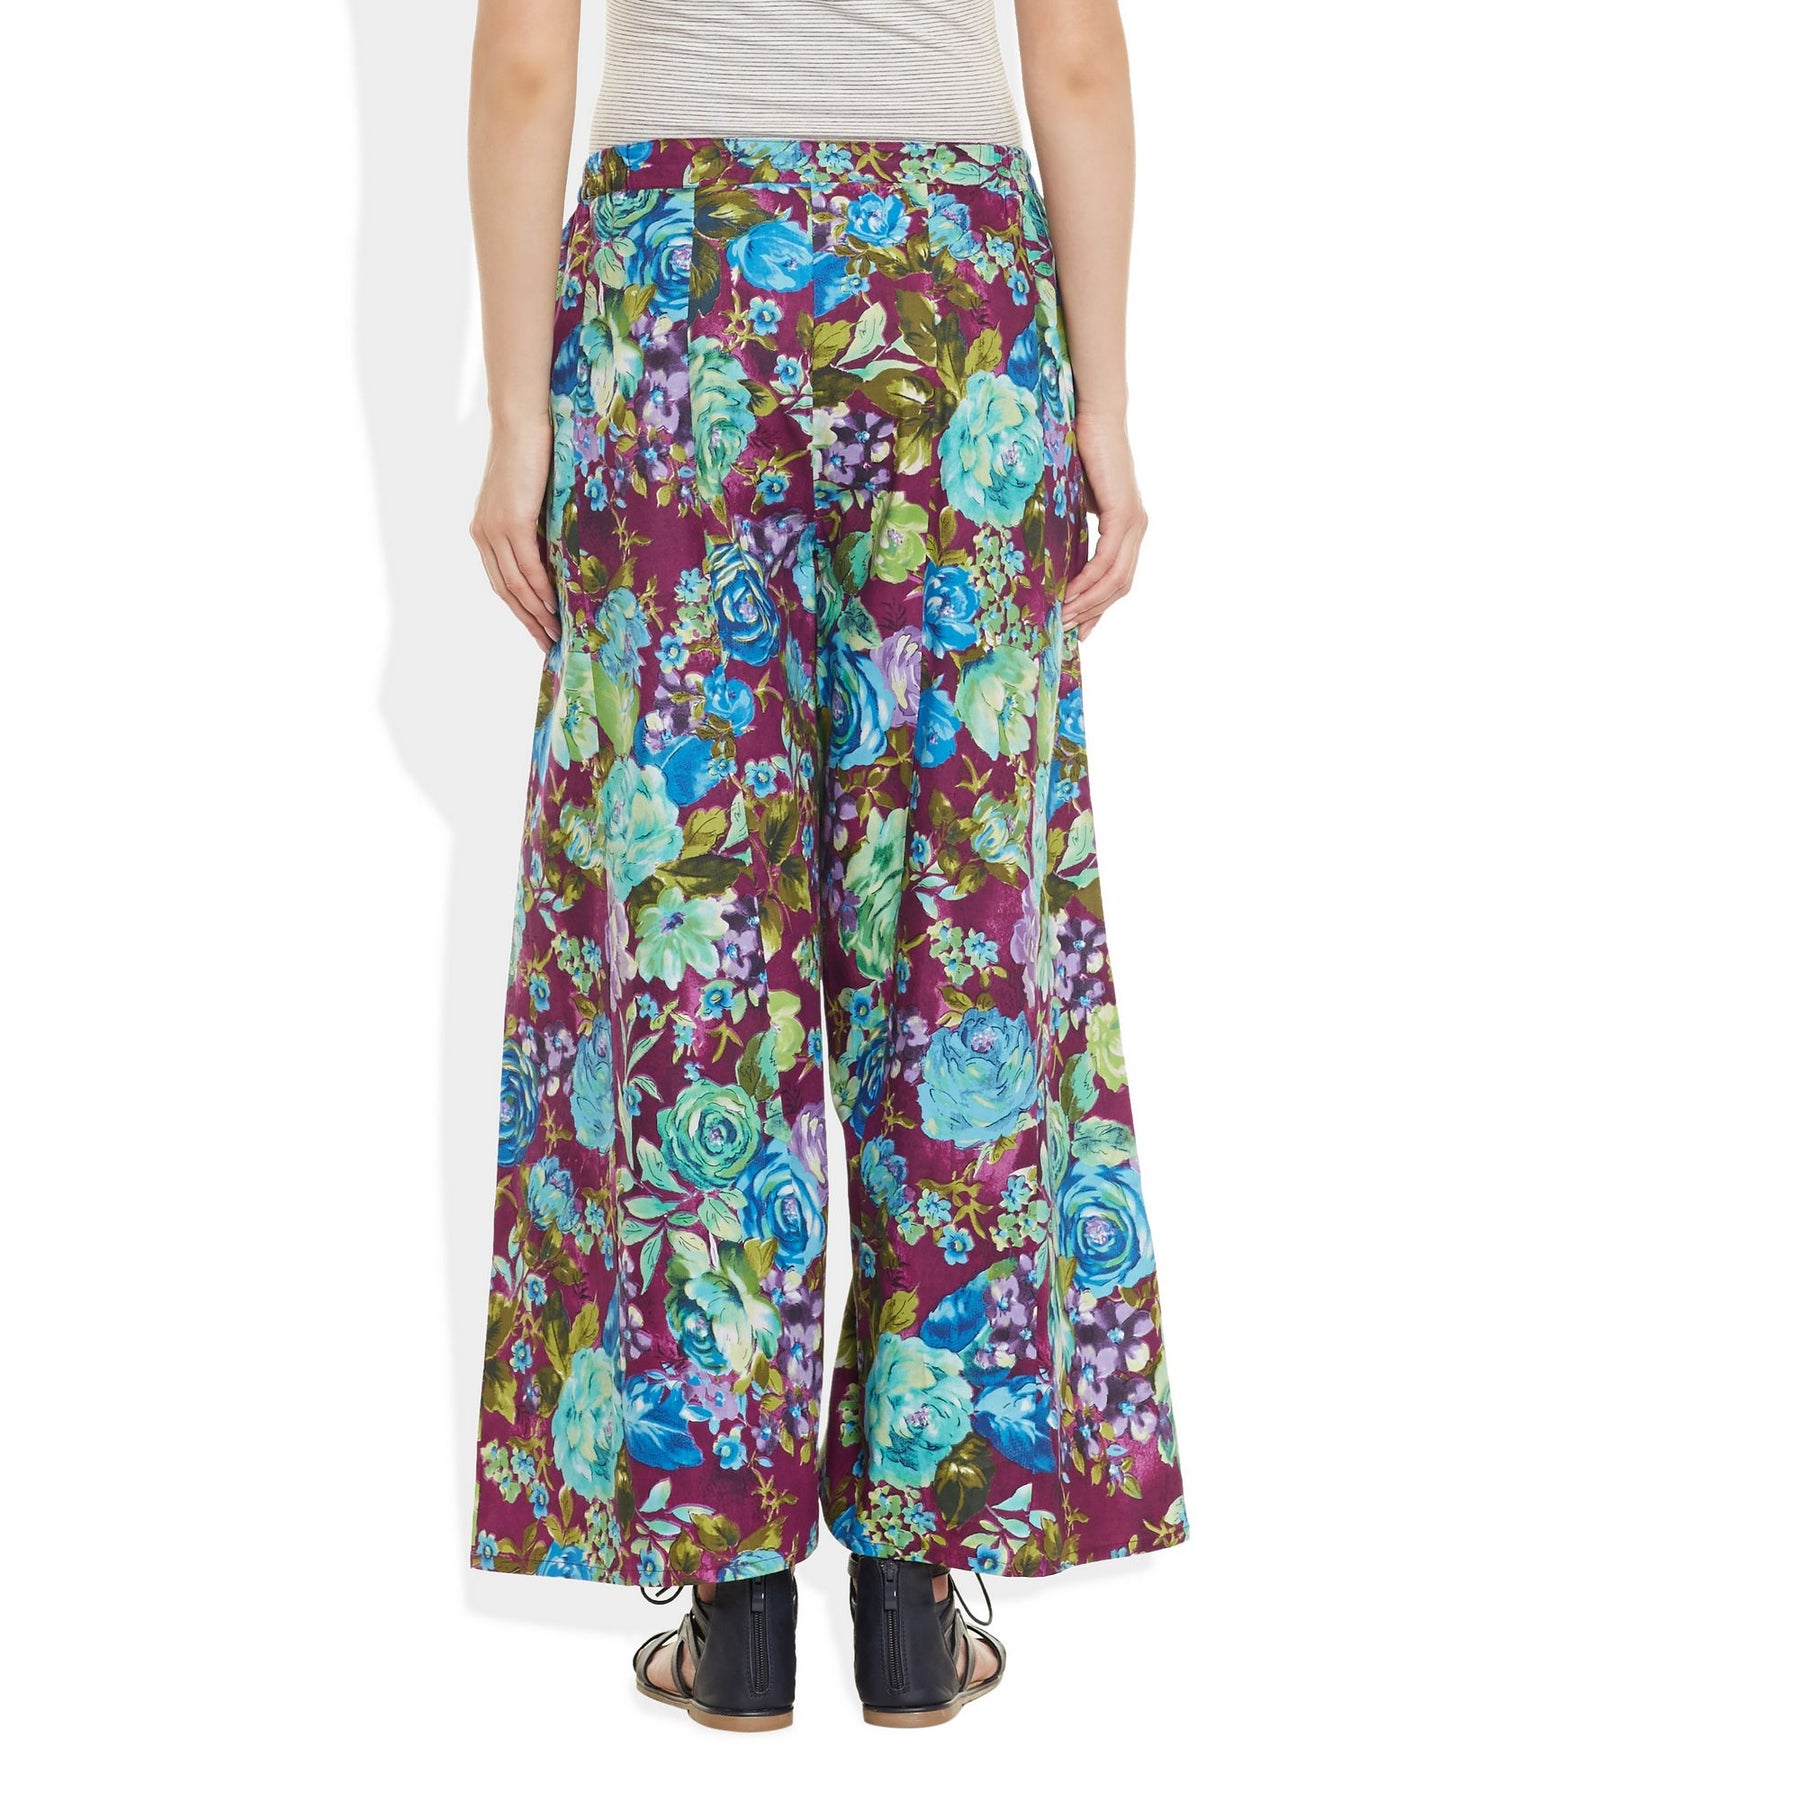 Buy Present Indian Women Dhoti Pants Pleated Harem Patiala Style for Women  India Clothing Free Size 28 Till 34 Printed Dhoti Black Color at Amazonin